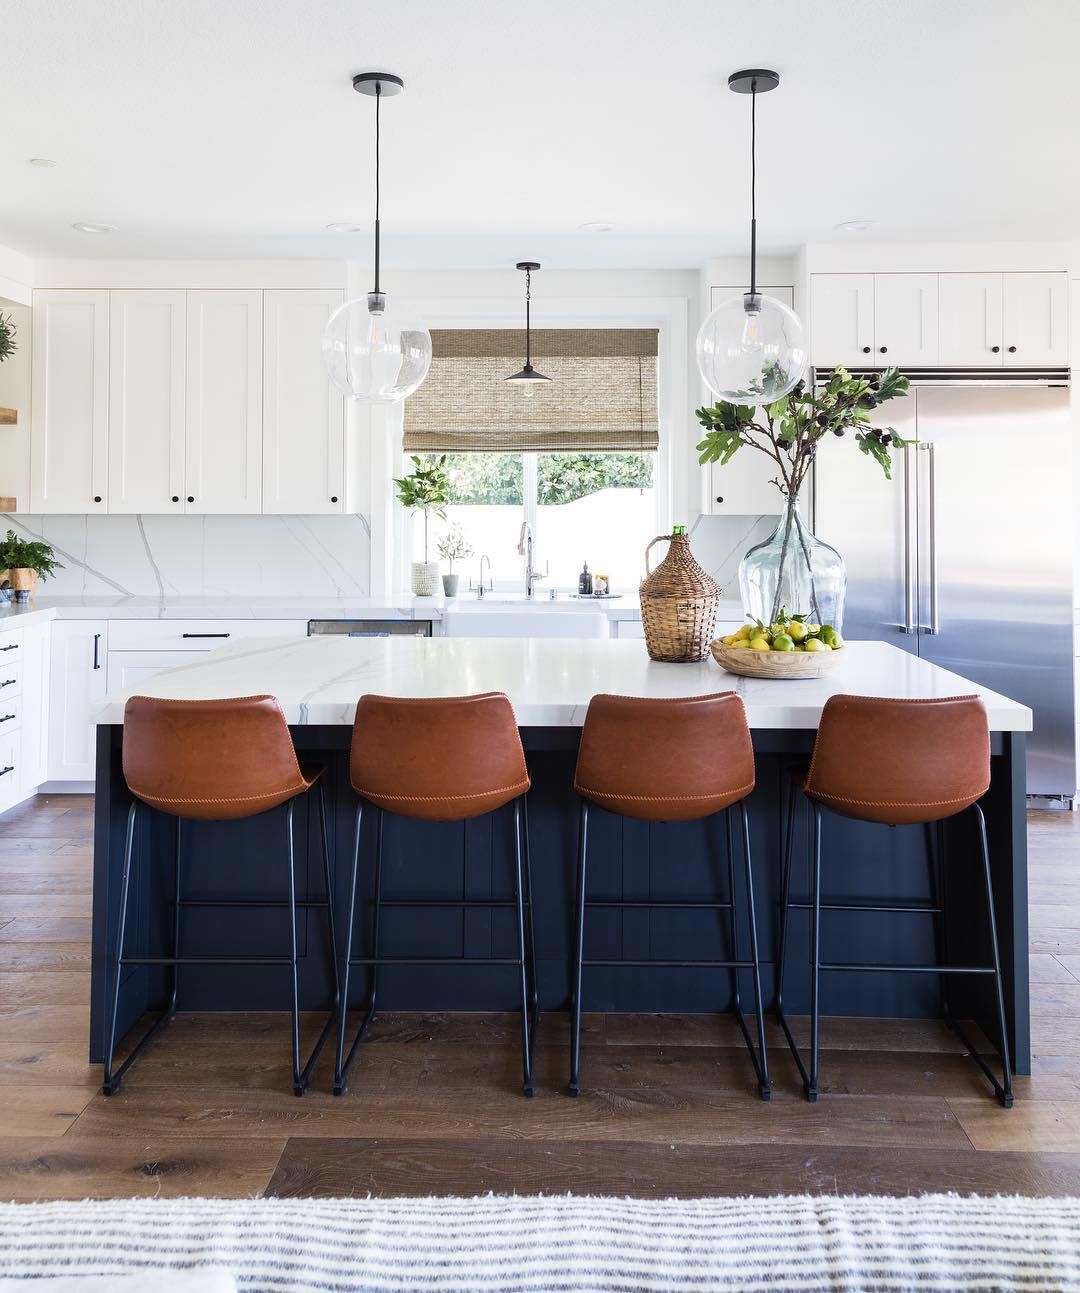 Brown Leather Counter Chairs in Kitchen via @puresaltinteriors